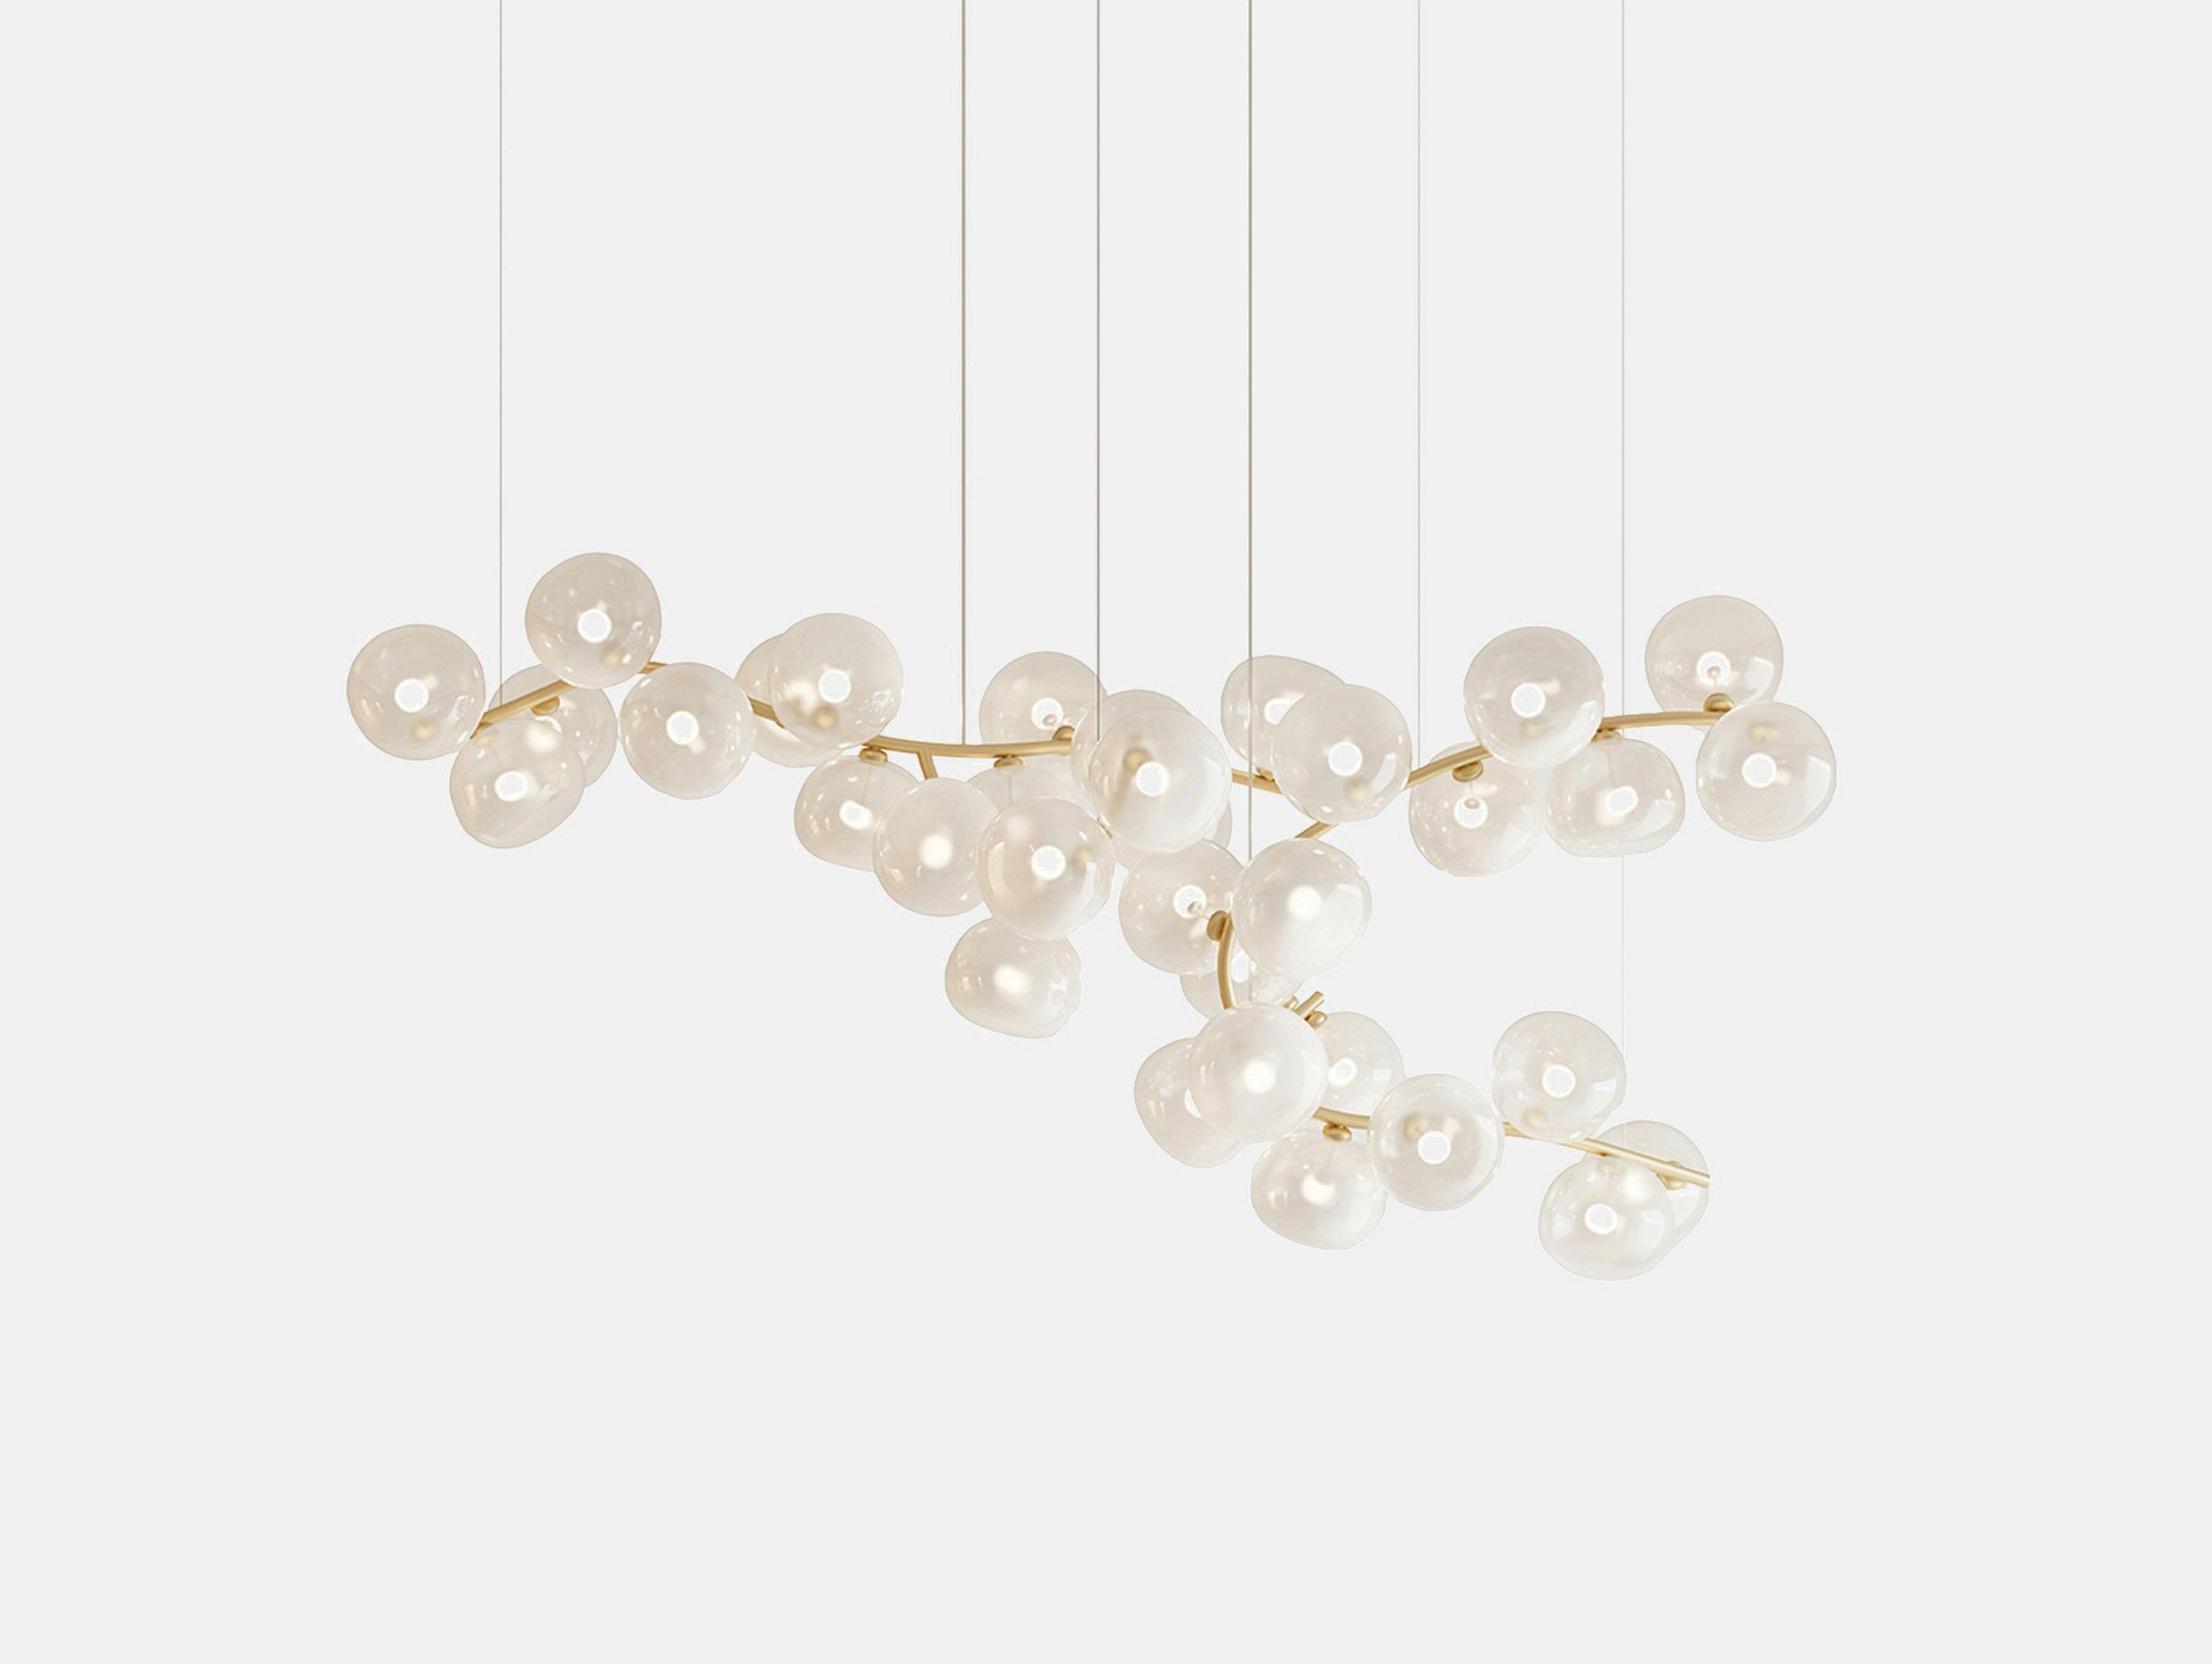 Cristiana giopato christopher coombes maehwa chandelier branch 342